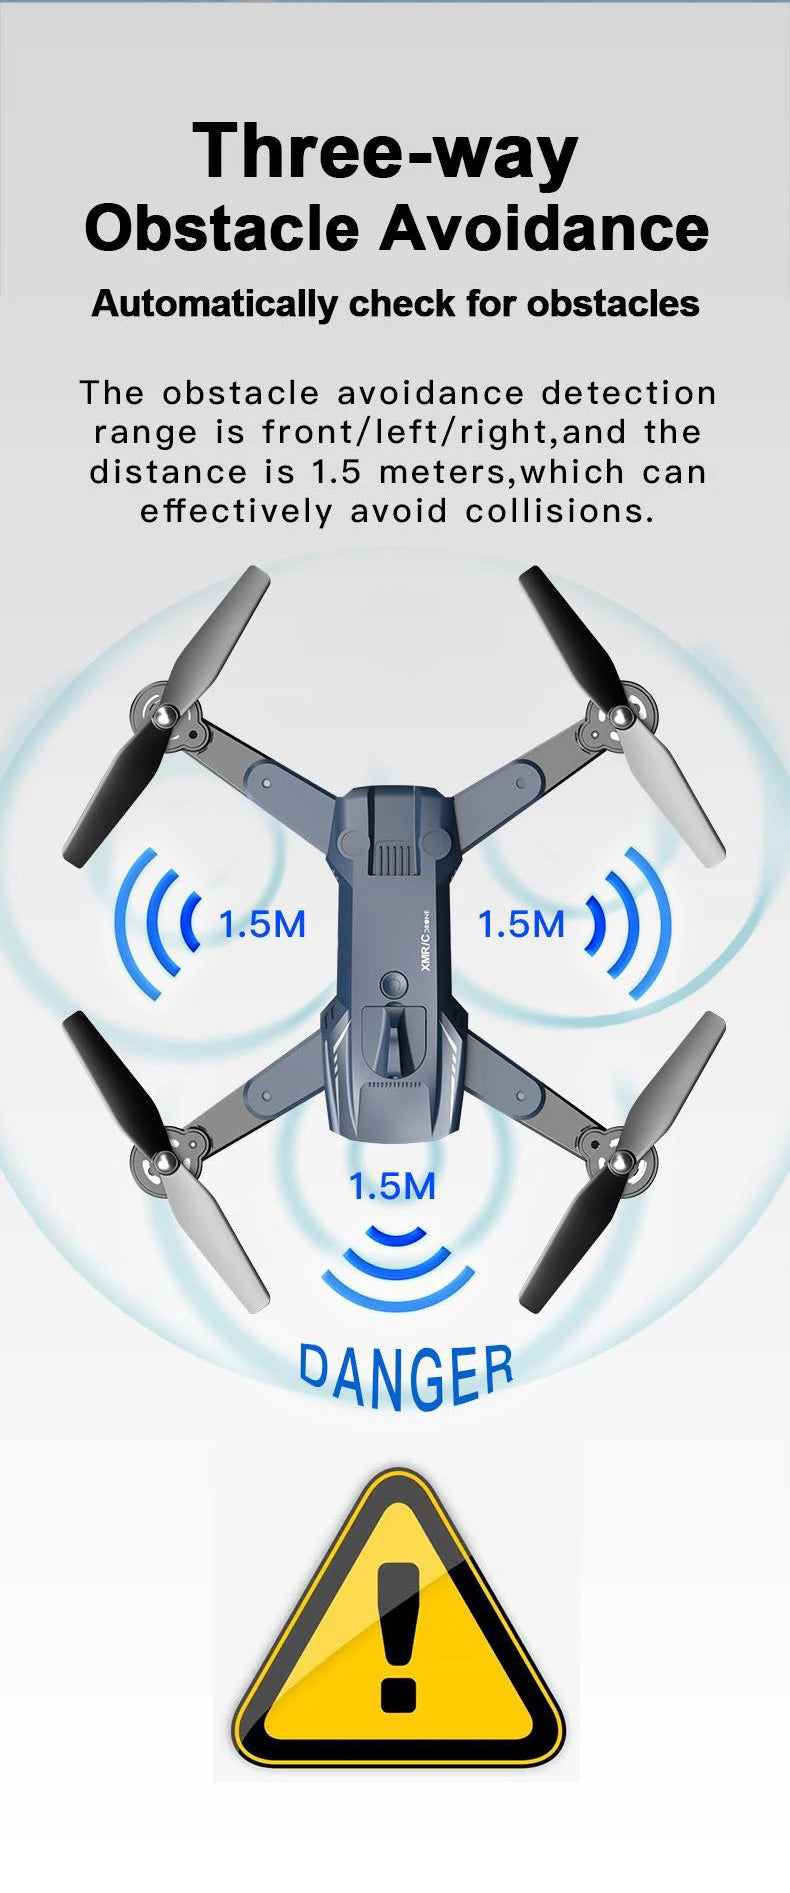 M6 Drone, the obstacle avoidance detection range is front/left/right,and